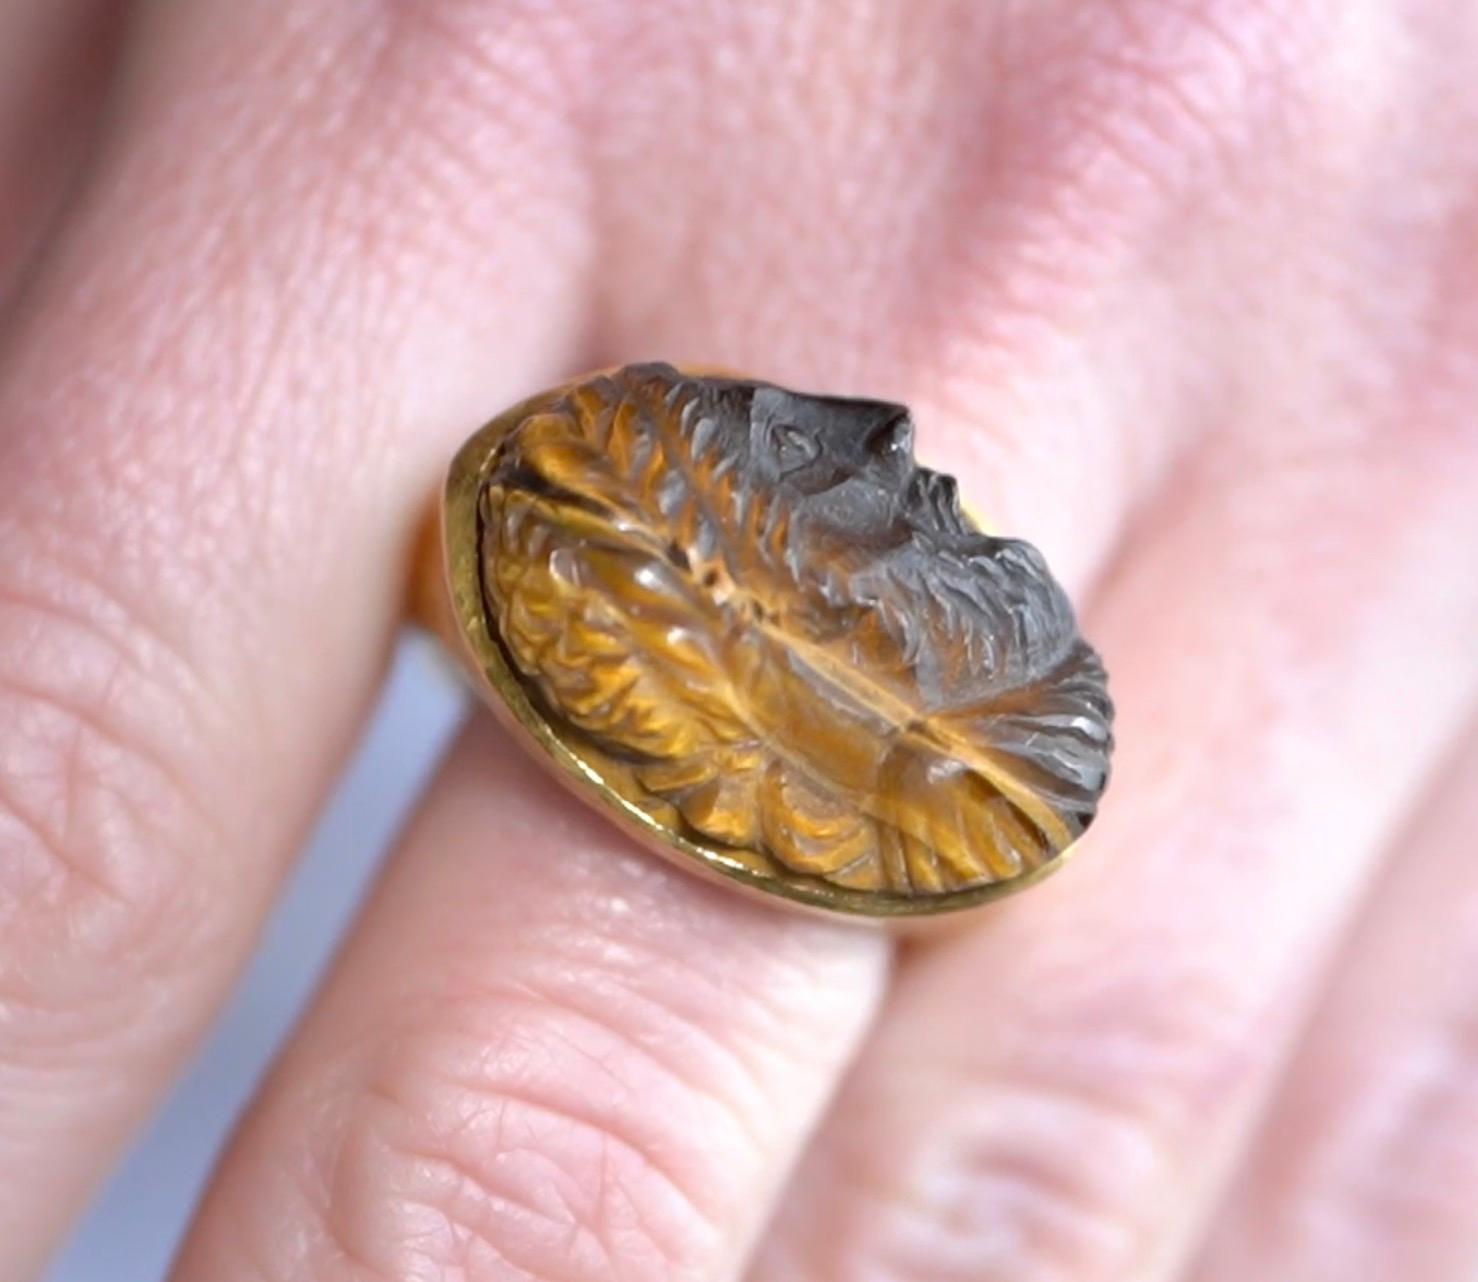 ZEUS God of the Sky and Thunder, Zeus, the ruler of Mount Olympus, Tiger's Eye Carving Statement Ring by Prehistoric Works of Istanbul, Turkey

Statement Ring
Large, Carved Tiger’s eye - 27ct
24K Gold - 2.40 grams
Sterling 925 - 6.75 grams